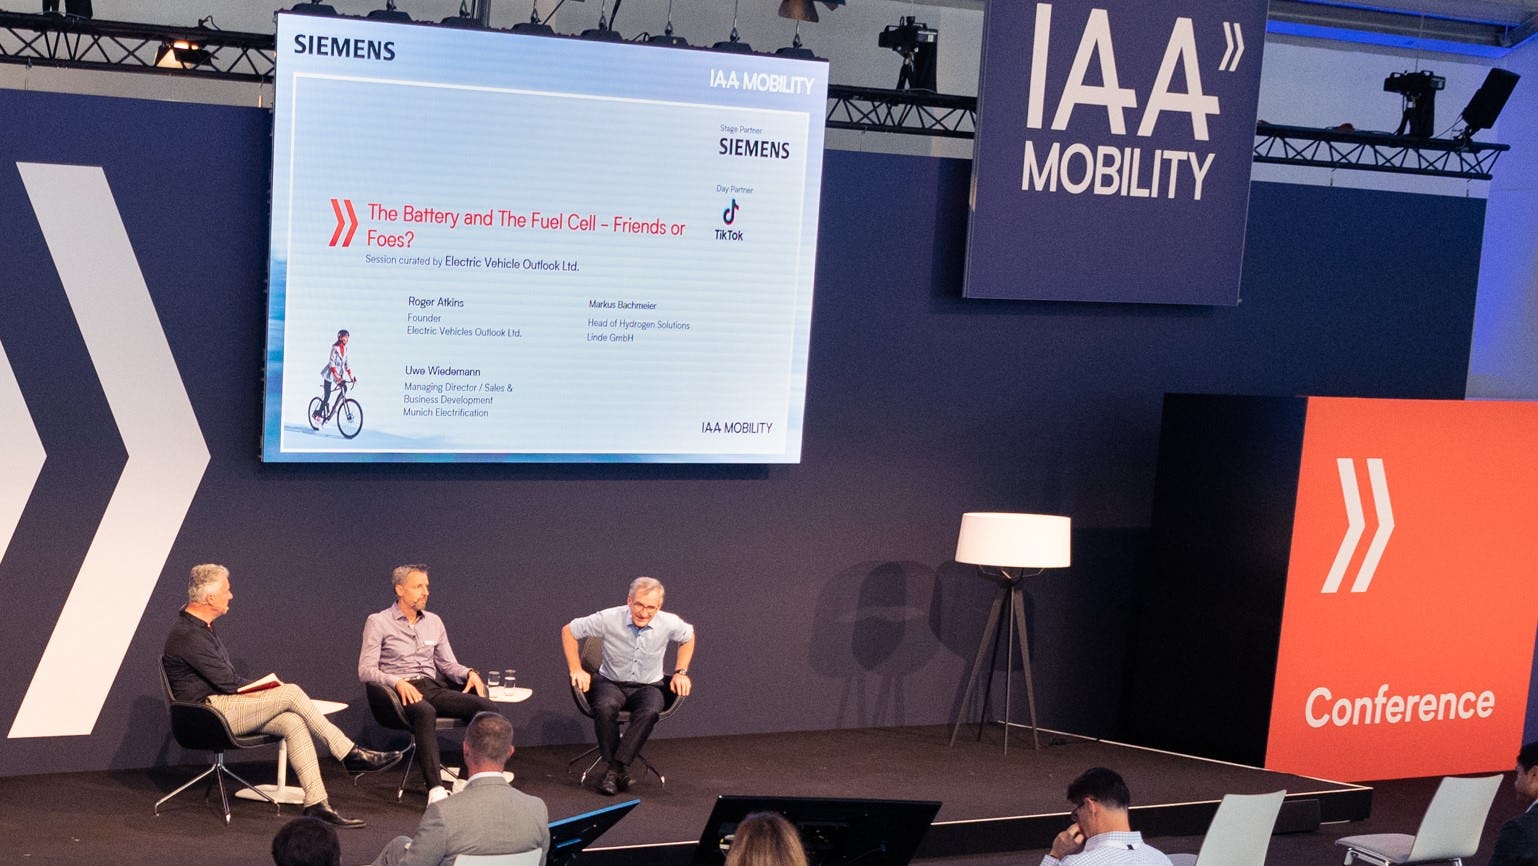 The IAA Conference will be held on three big stages in the IAA Summit halls. – Photo IAA Mobility